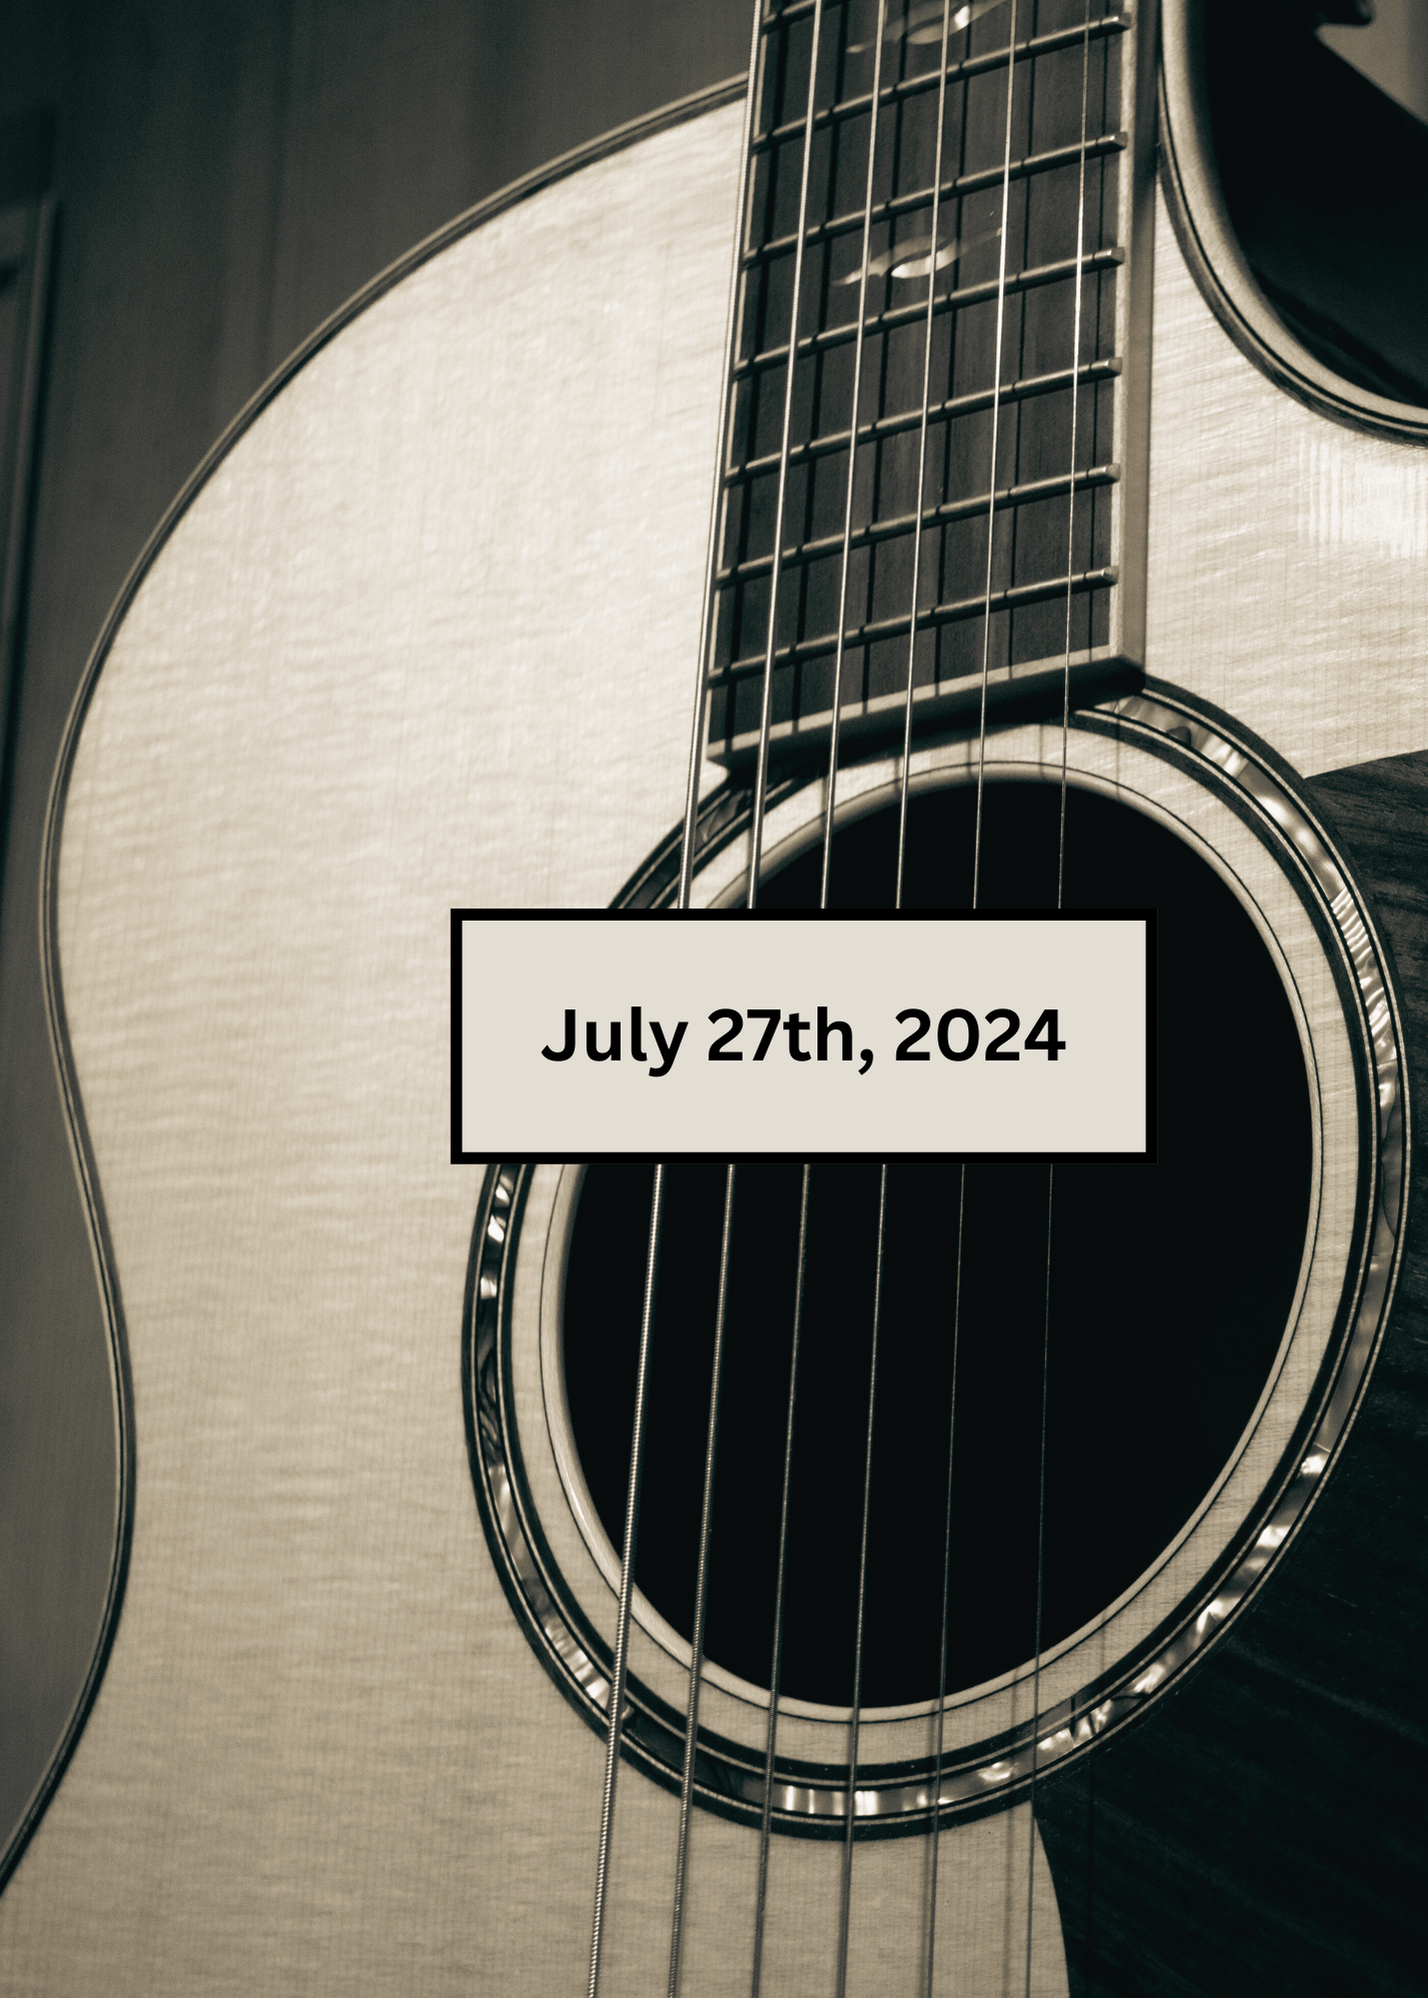 Guitar and Drum Circle Registration - July 27th, 2024